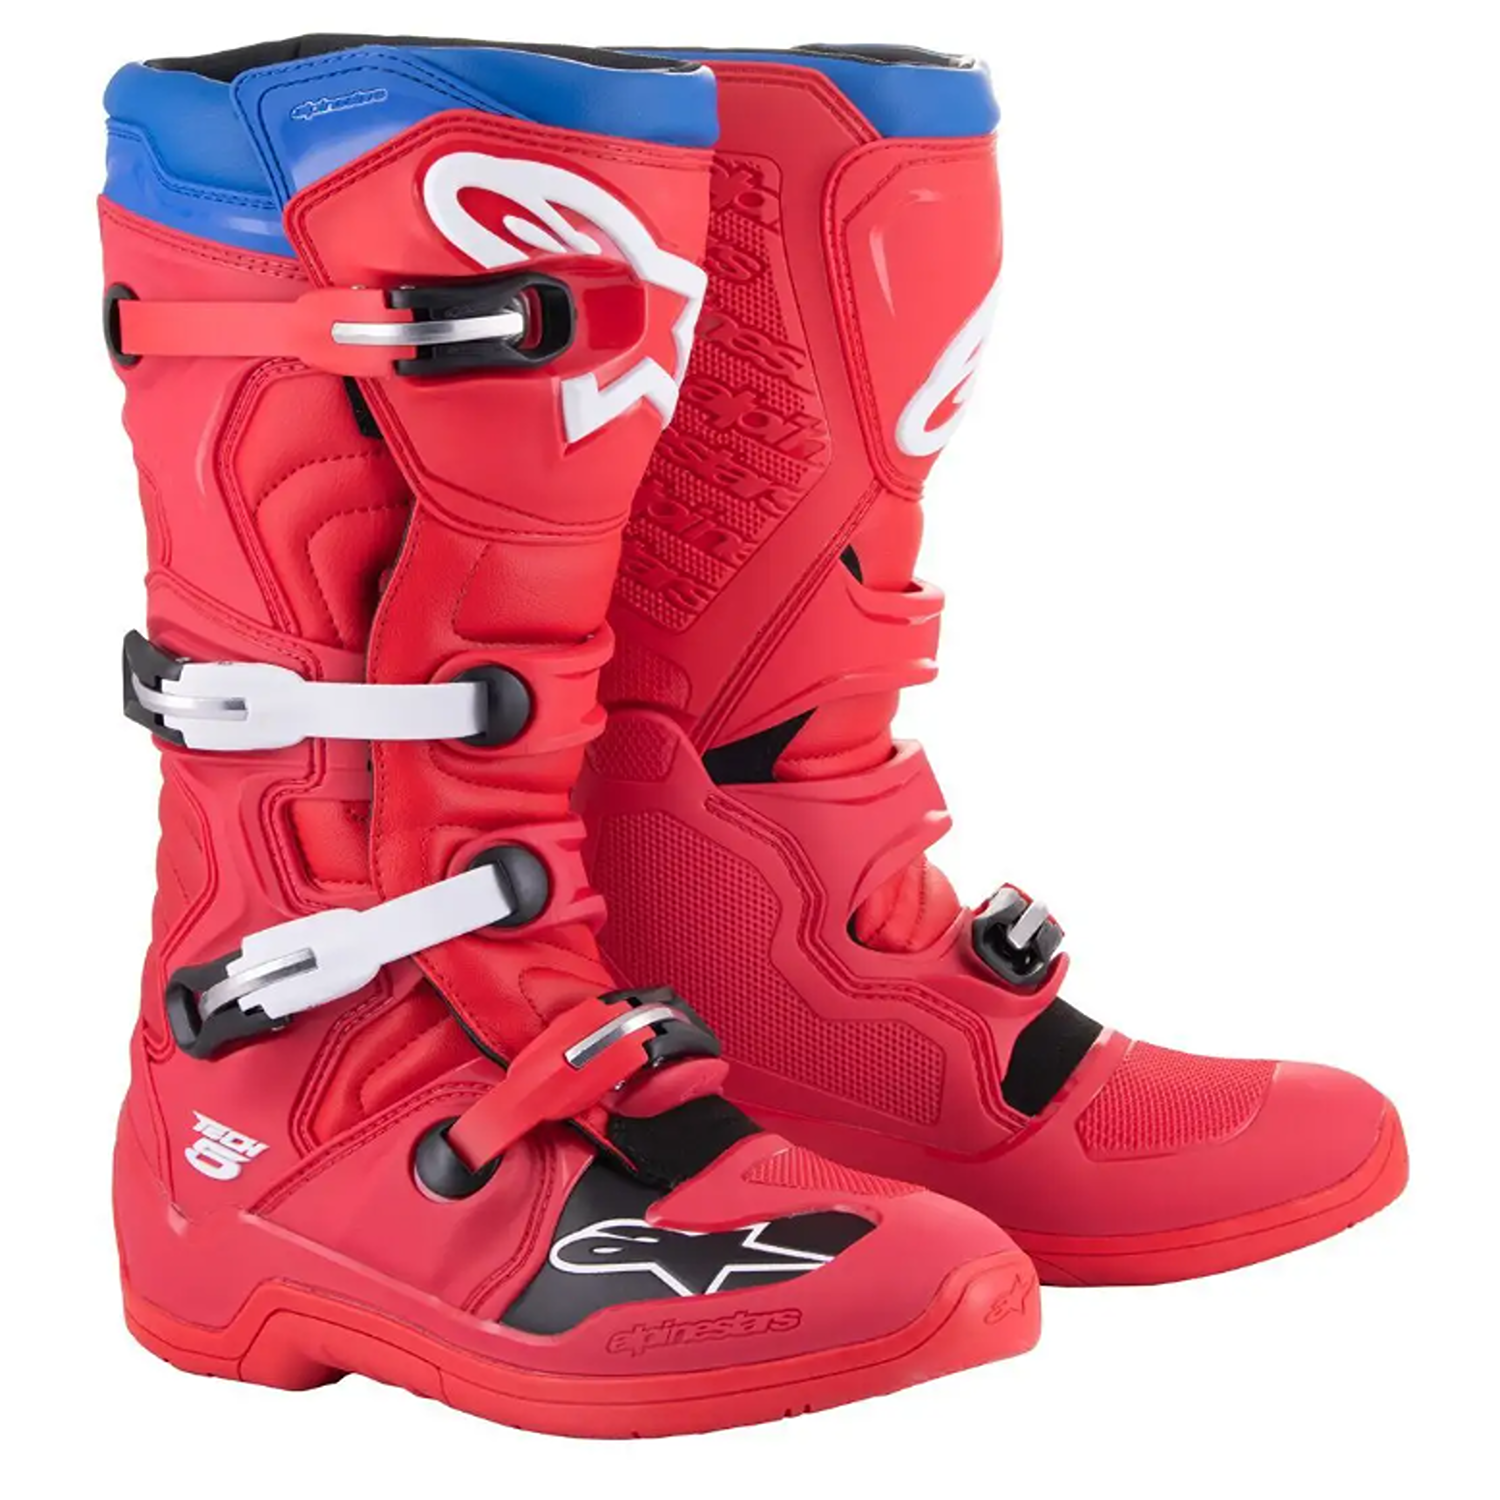 Image of EU Alpinestars Tech 5 Boots Bright Red Dark Red Blue Taille US 5